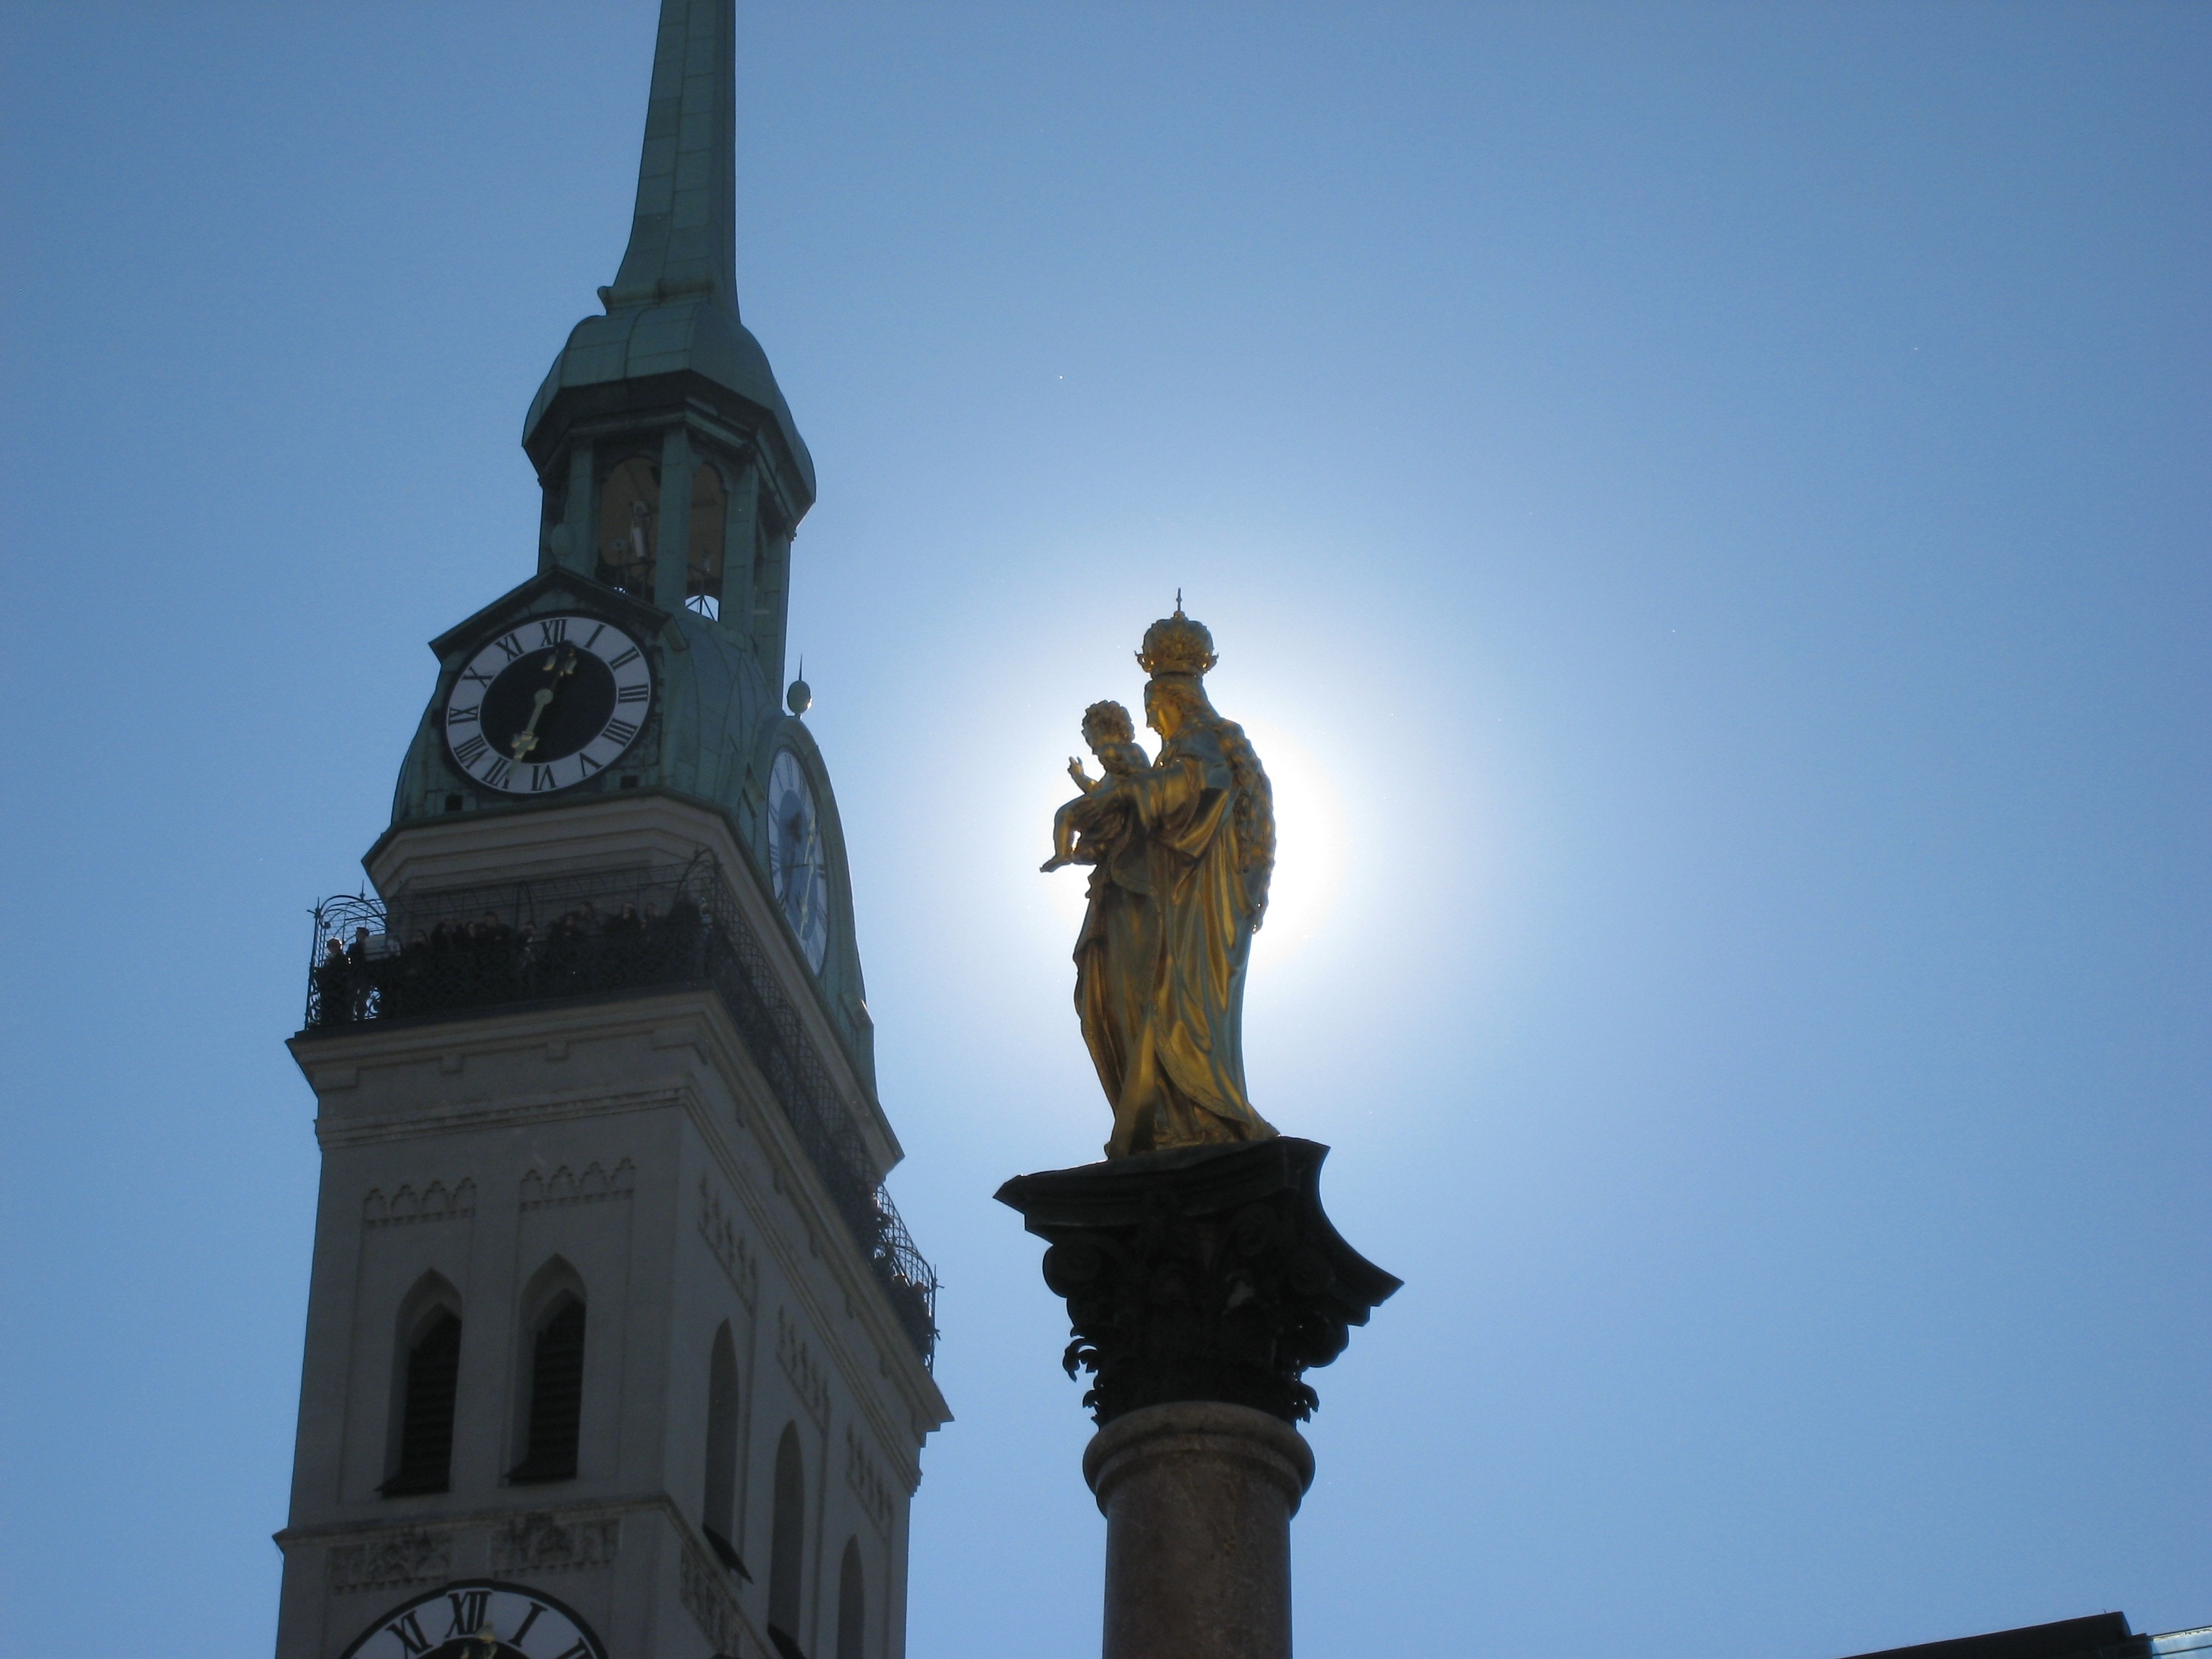 woman carrying baby statue near tower with analog clock under blue sky